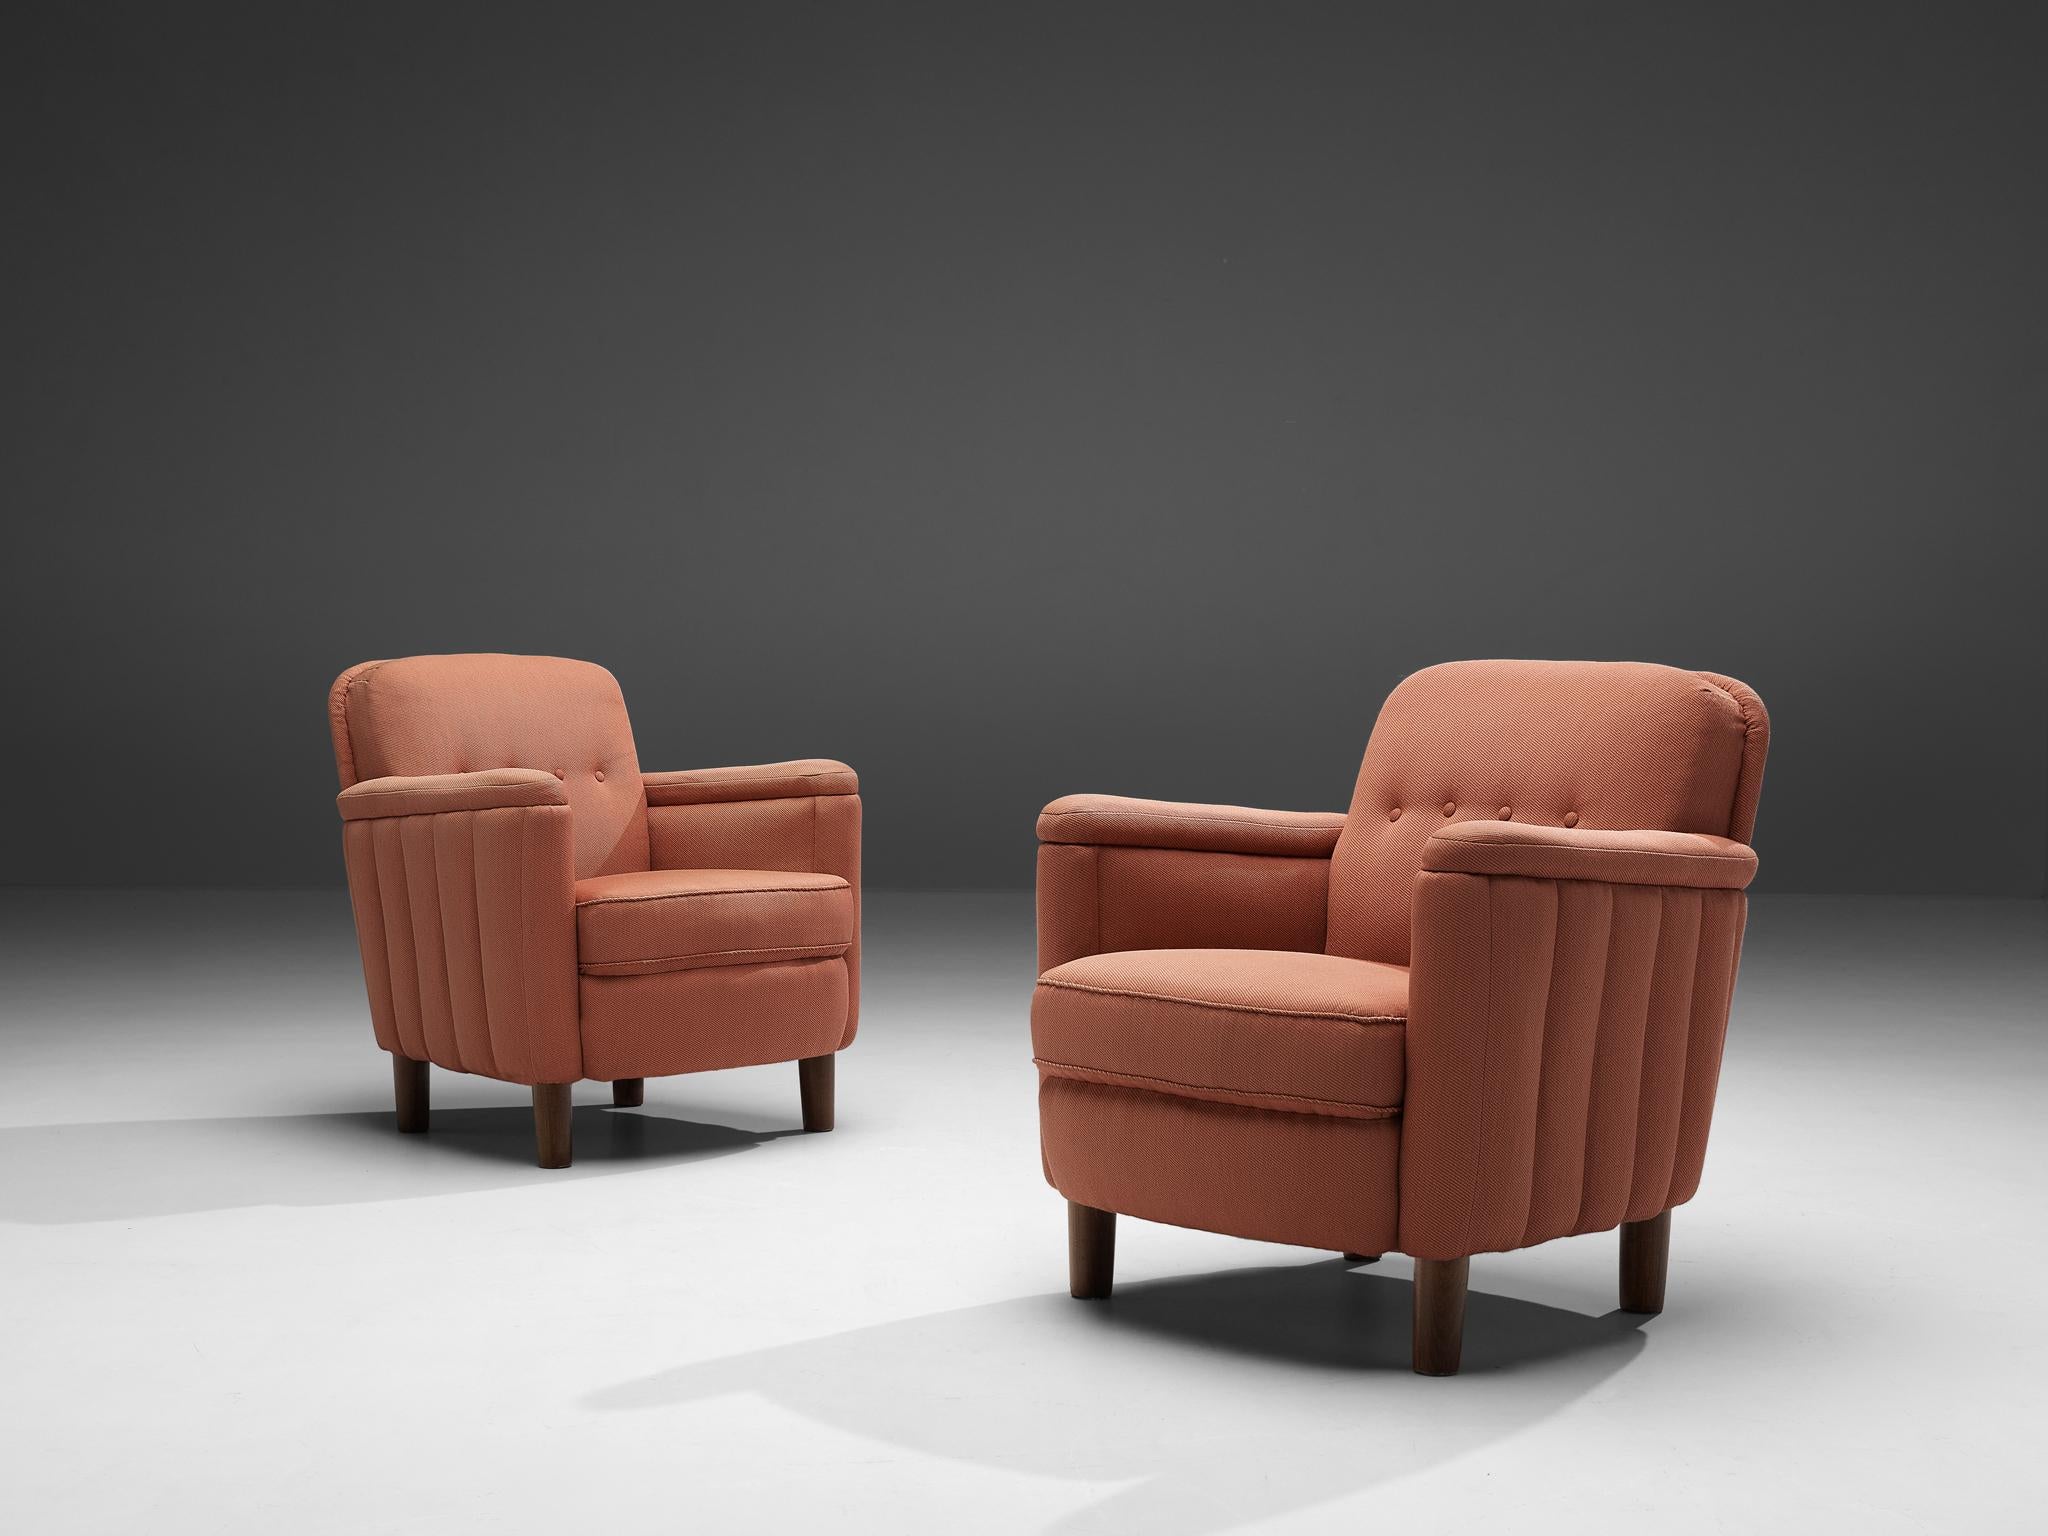 Easy chairs, pink fabric, beech, Denmark, 1930s

Wonderful, comfortable art deco chairs. This armchairs have beautiful details such as the structured sides of the armrest, which adds a gorgeous feature in the overal look. The nice, dark color of the